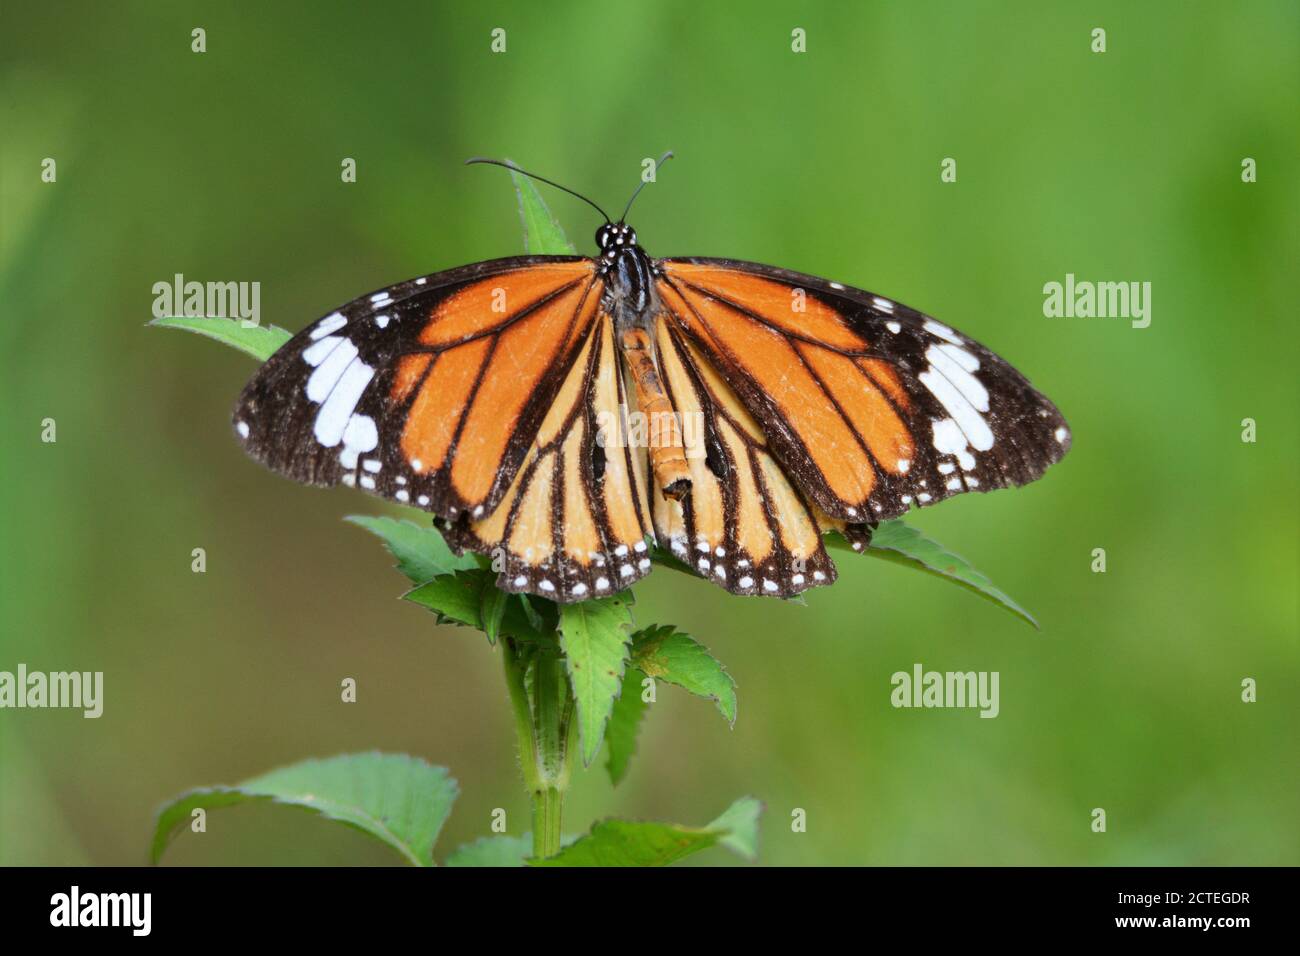 Butterfly - Tiger Butterfly on Plant Leaf Stock Photo